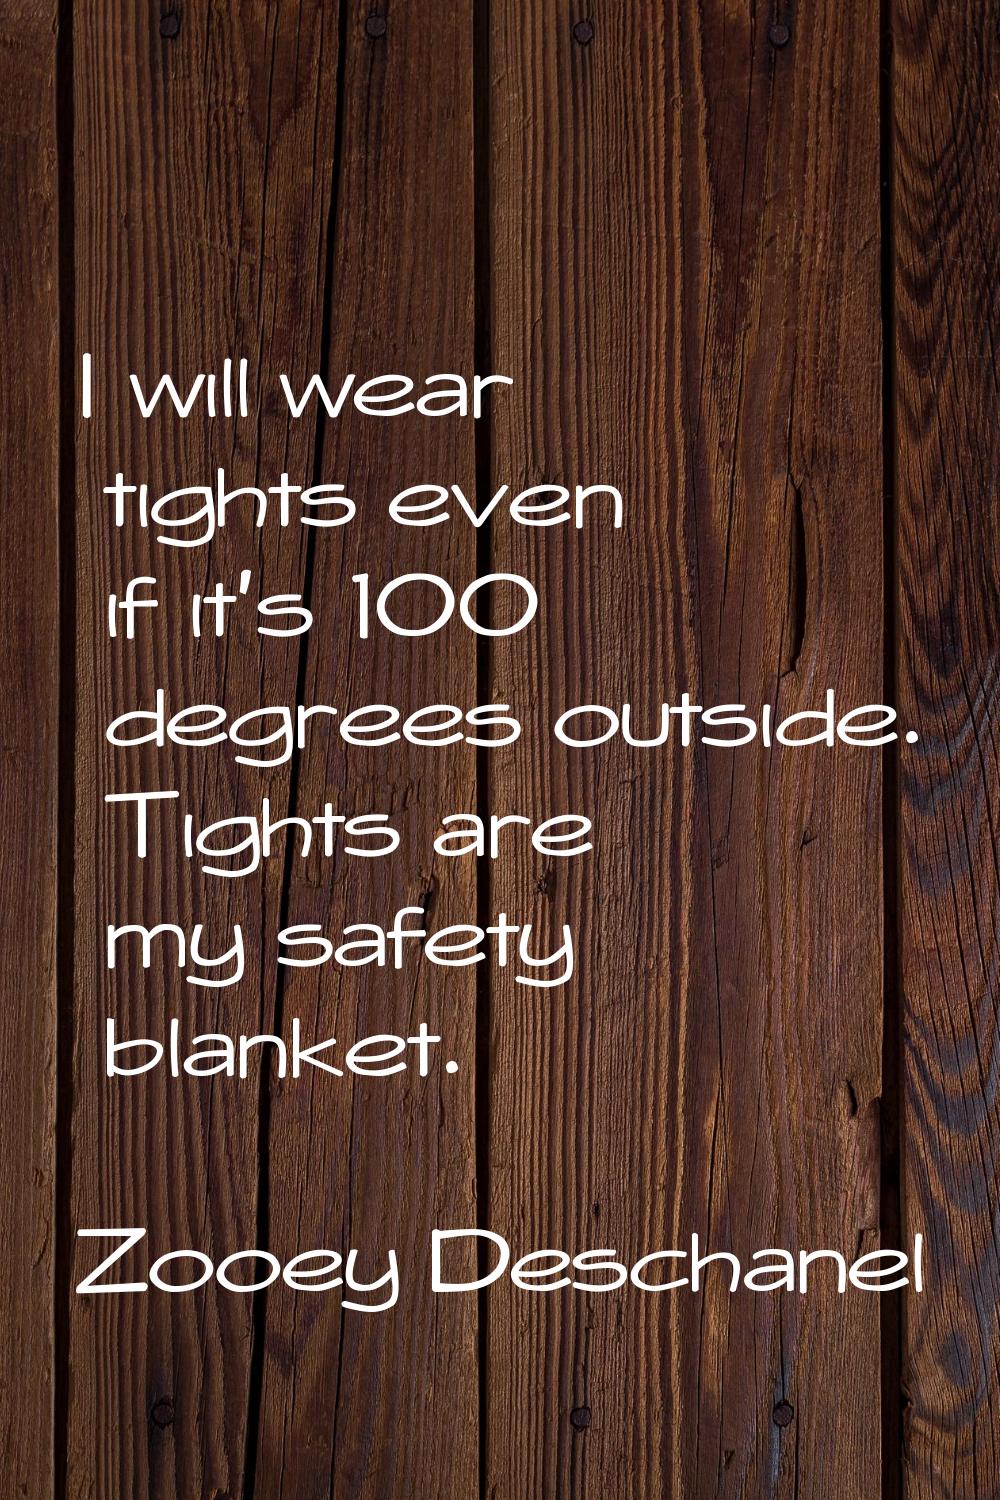 I will wear tights even if it's 100 degrees outside. Tights are my safety blanket.